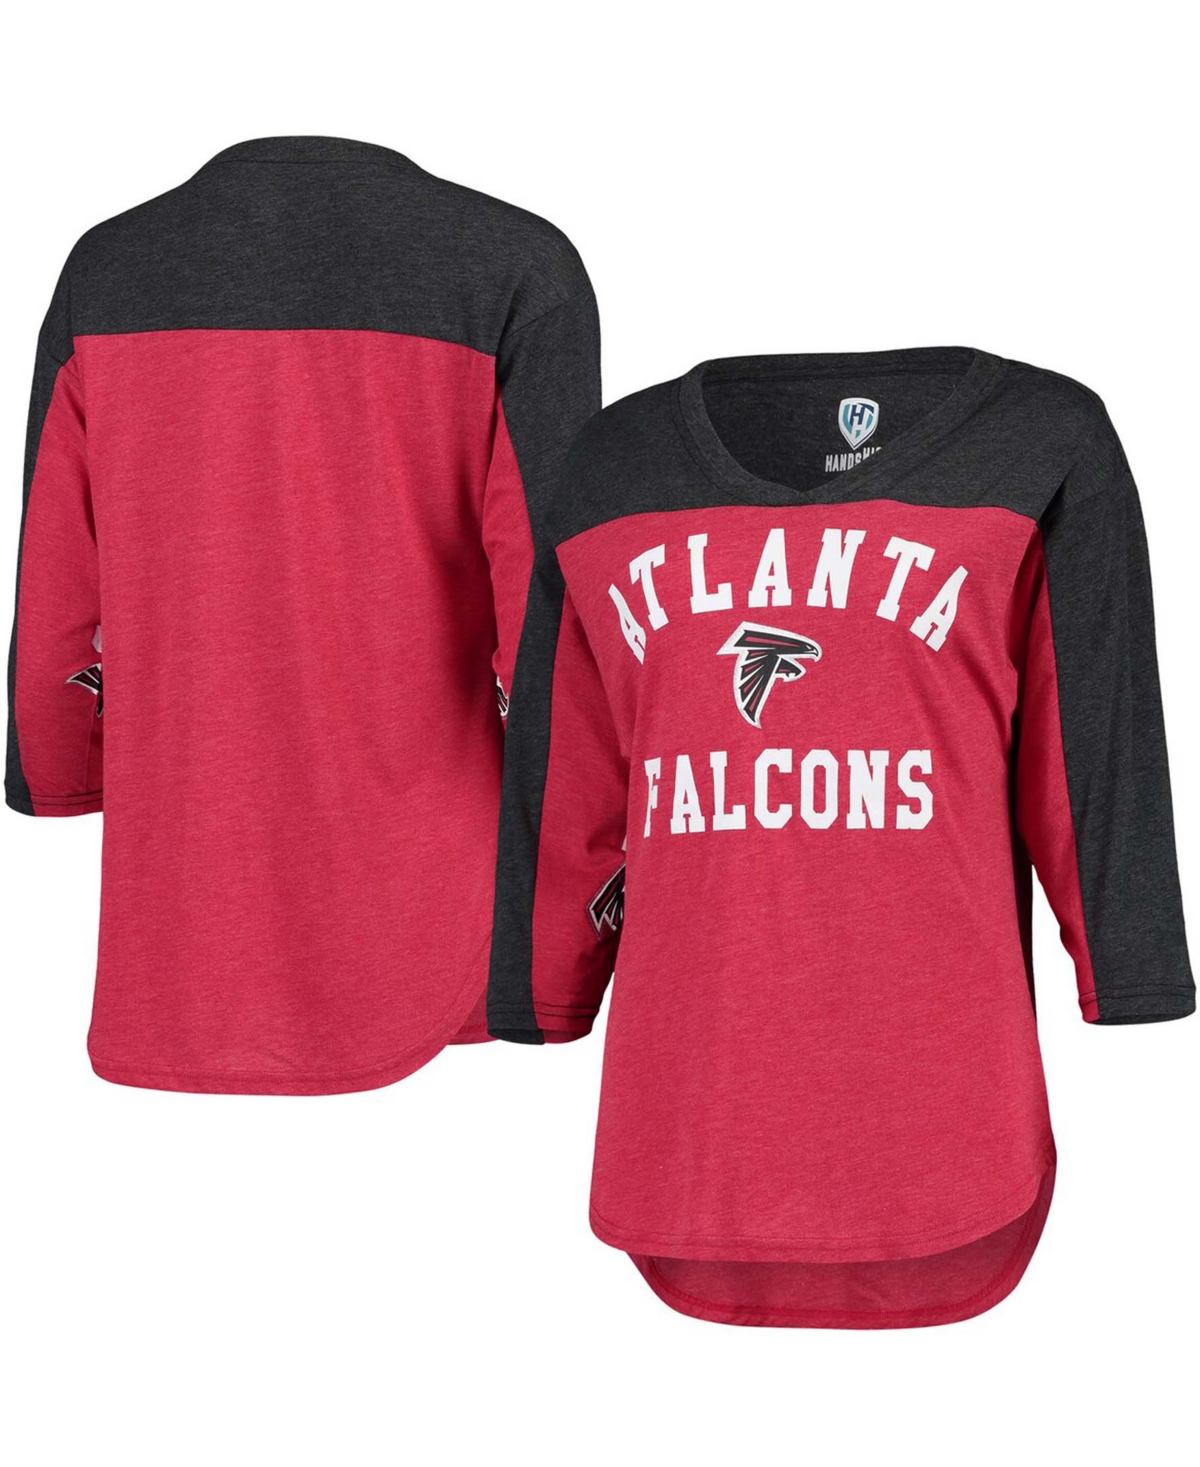 Hands High Women's Red, Black Atlanta Falcons In The Zone 3/4 Sleeve V-Neck T-shirt